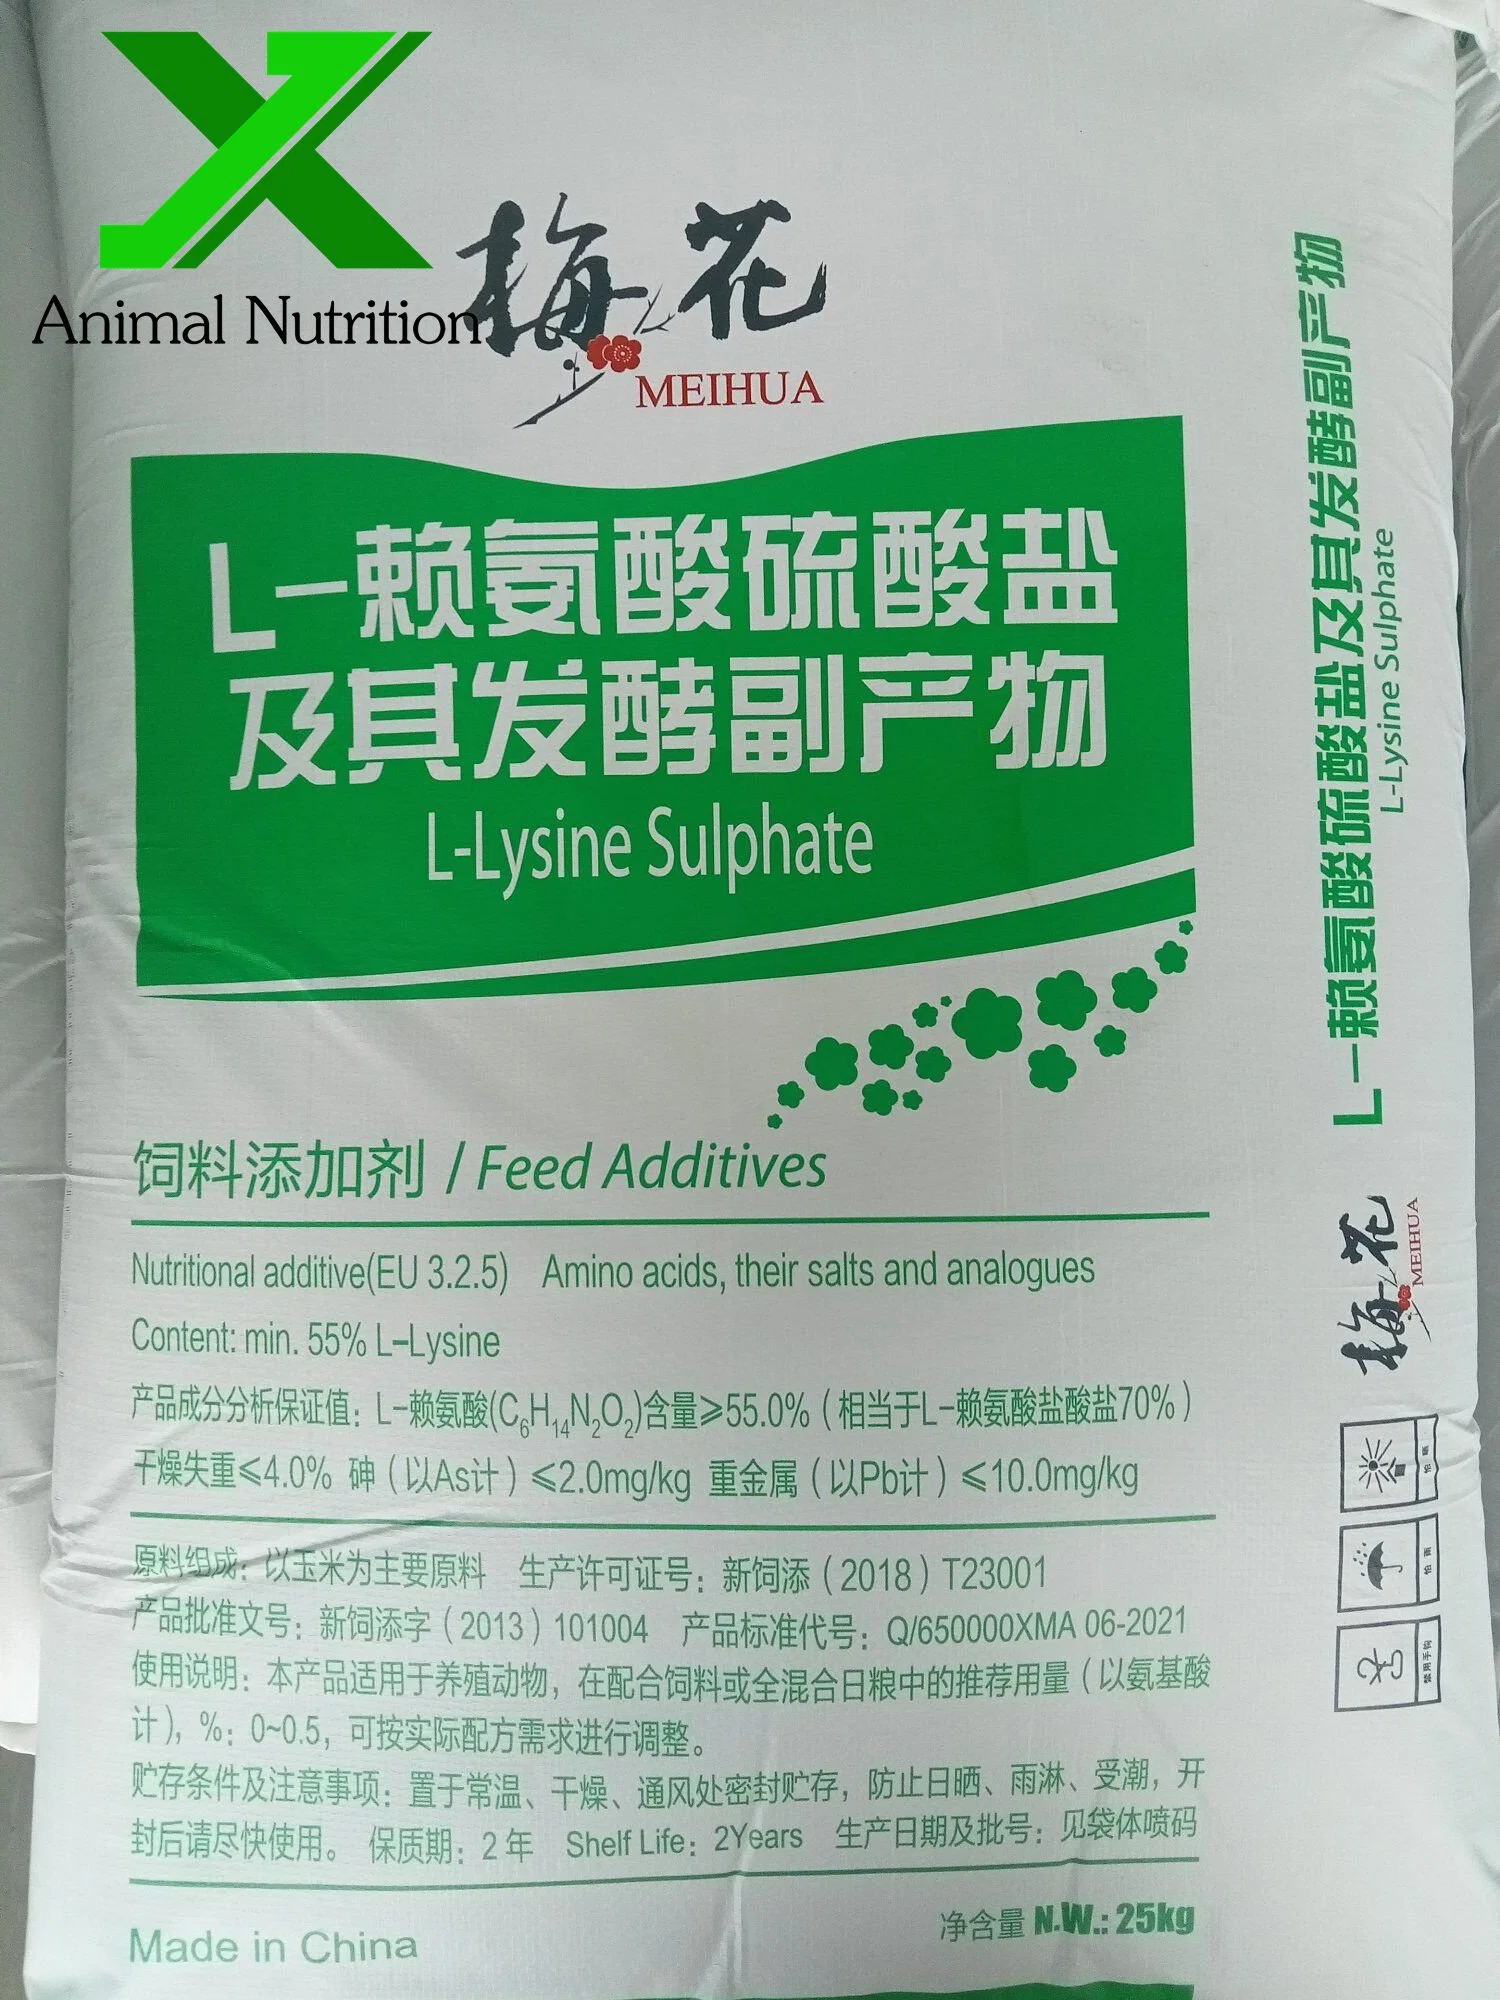 Meihua/Fufeng/Eppen/Golden Corn /Dongxiao Brand Animal Nutrition Feed Additives 70% L-Lysine Sulphate